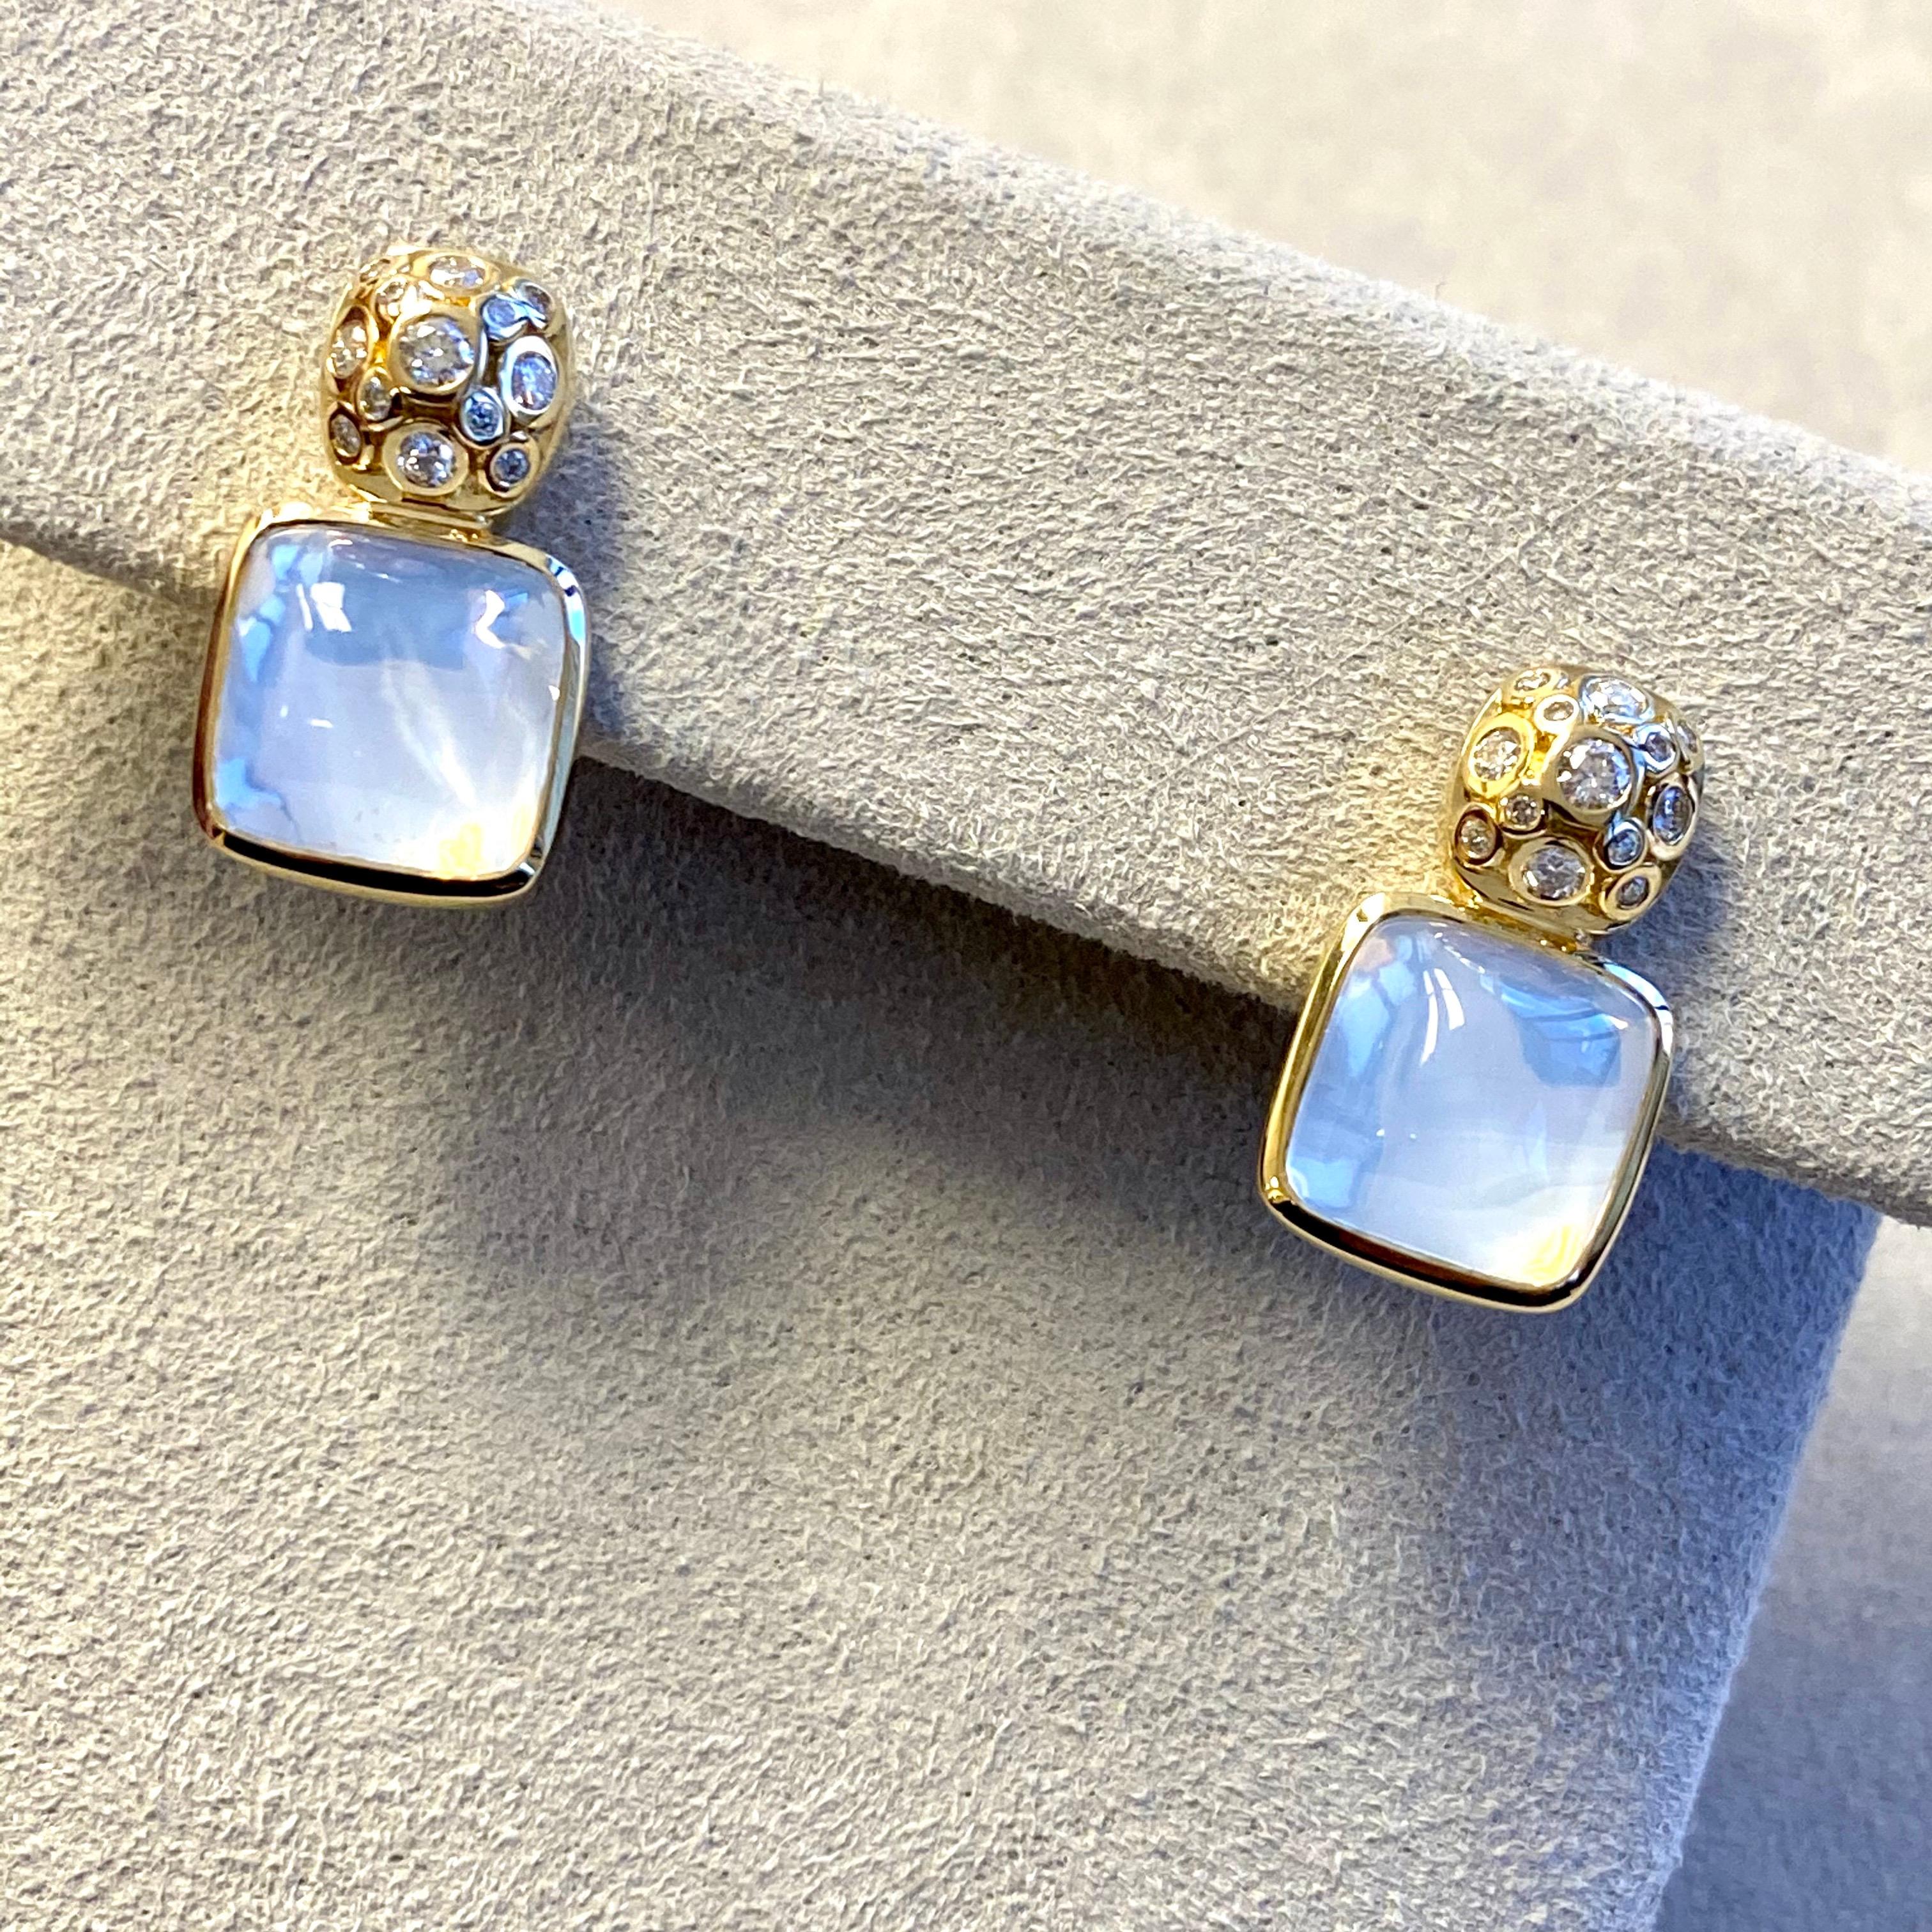 Created in 18kyg
Moon Quartz 10 carats approx.
Diamonds 0.30 carat approx.
Omega clip backs
Limited edition

Crafted from 18K yellow gold, these limited-edition earrings feature a dazzling 10-carat Moon Quartz, accented with 0.30 carats of diamonds,